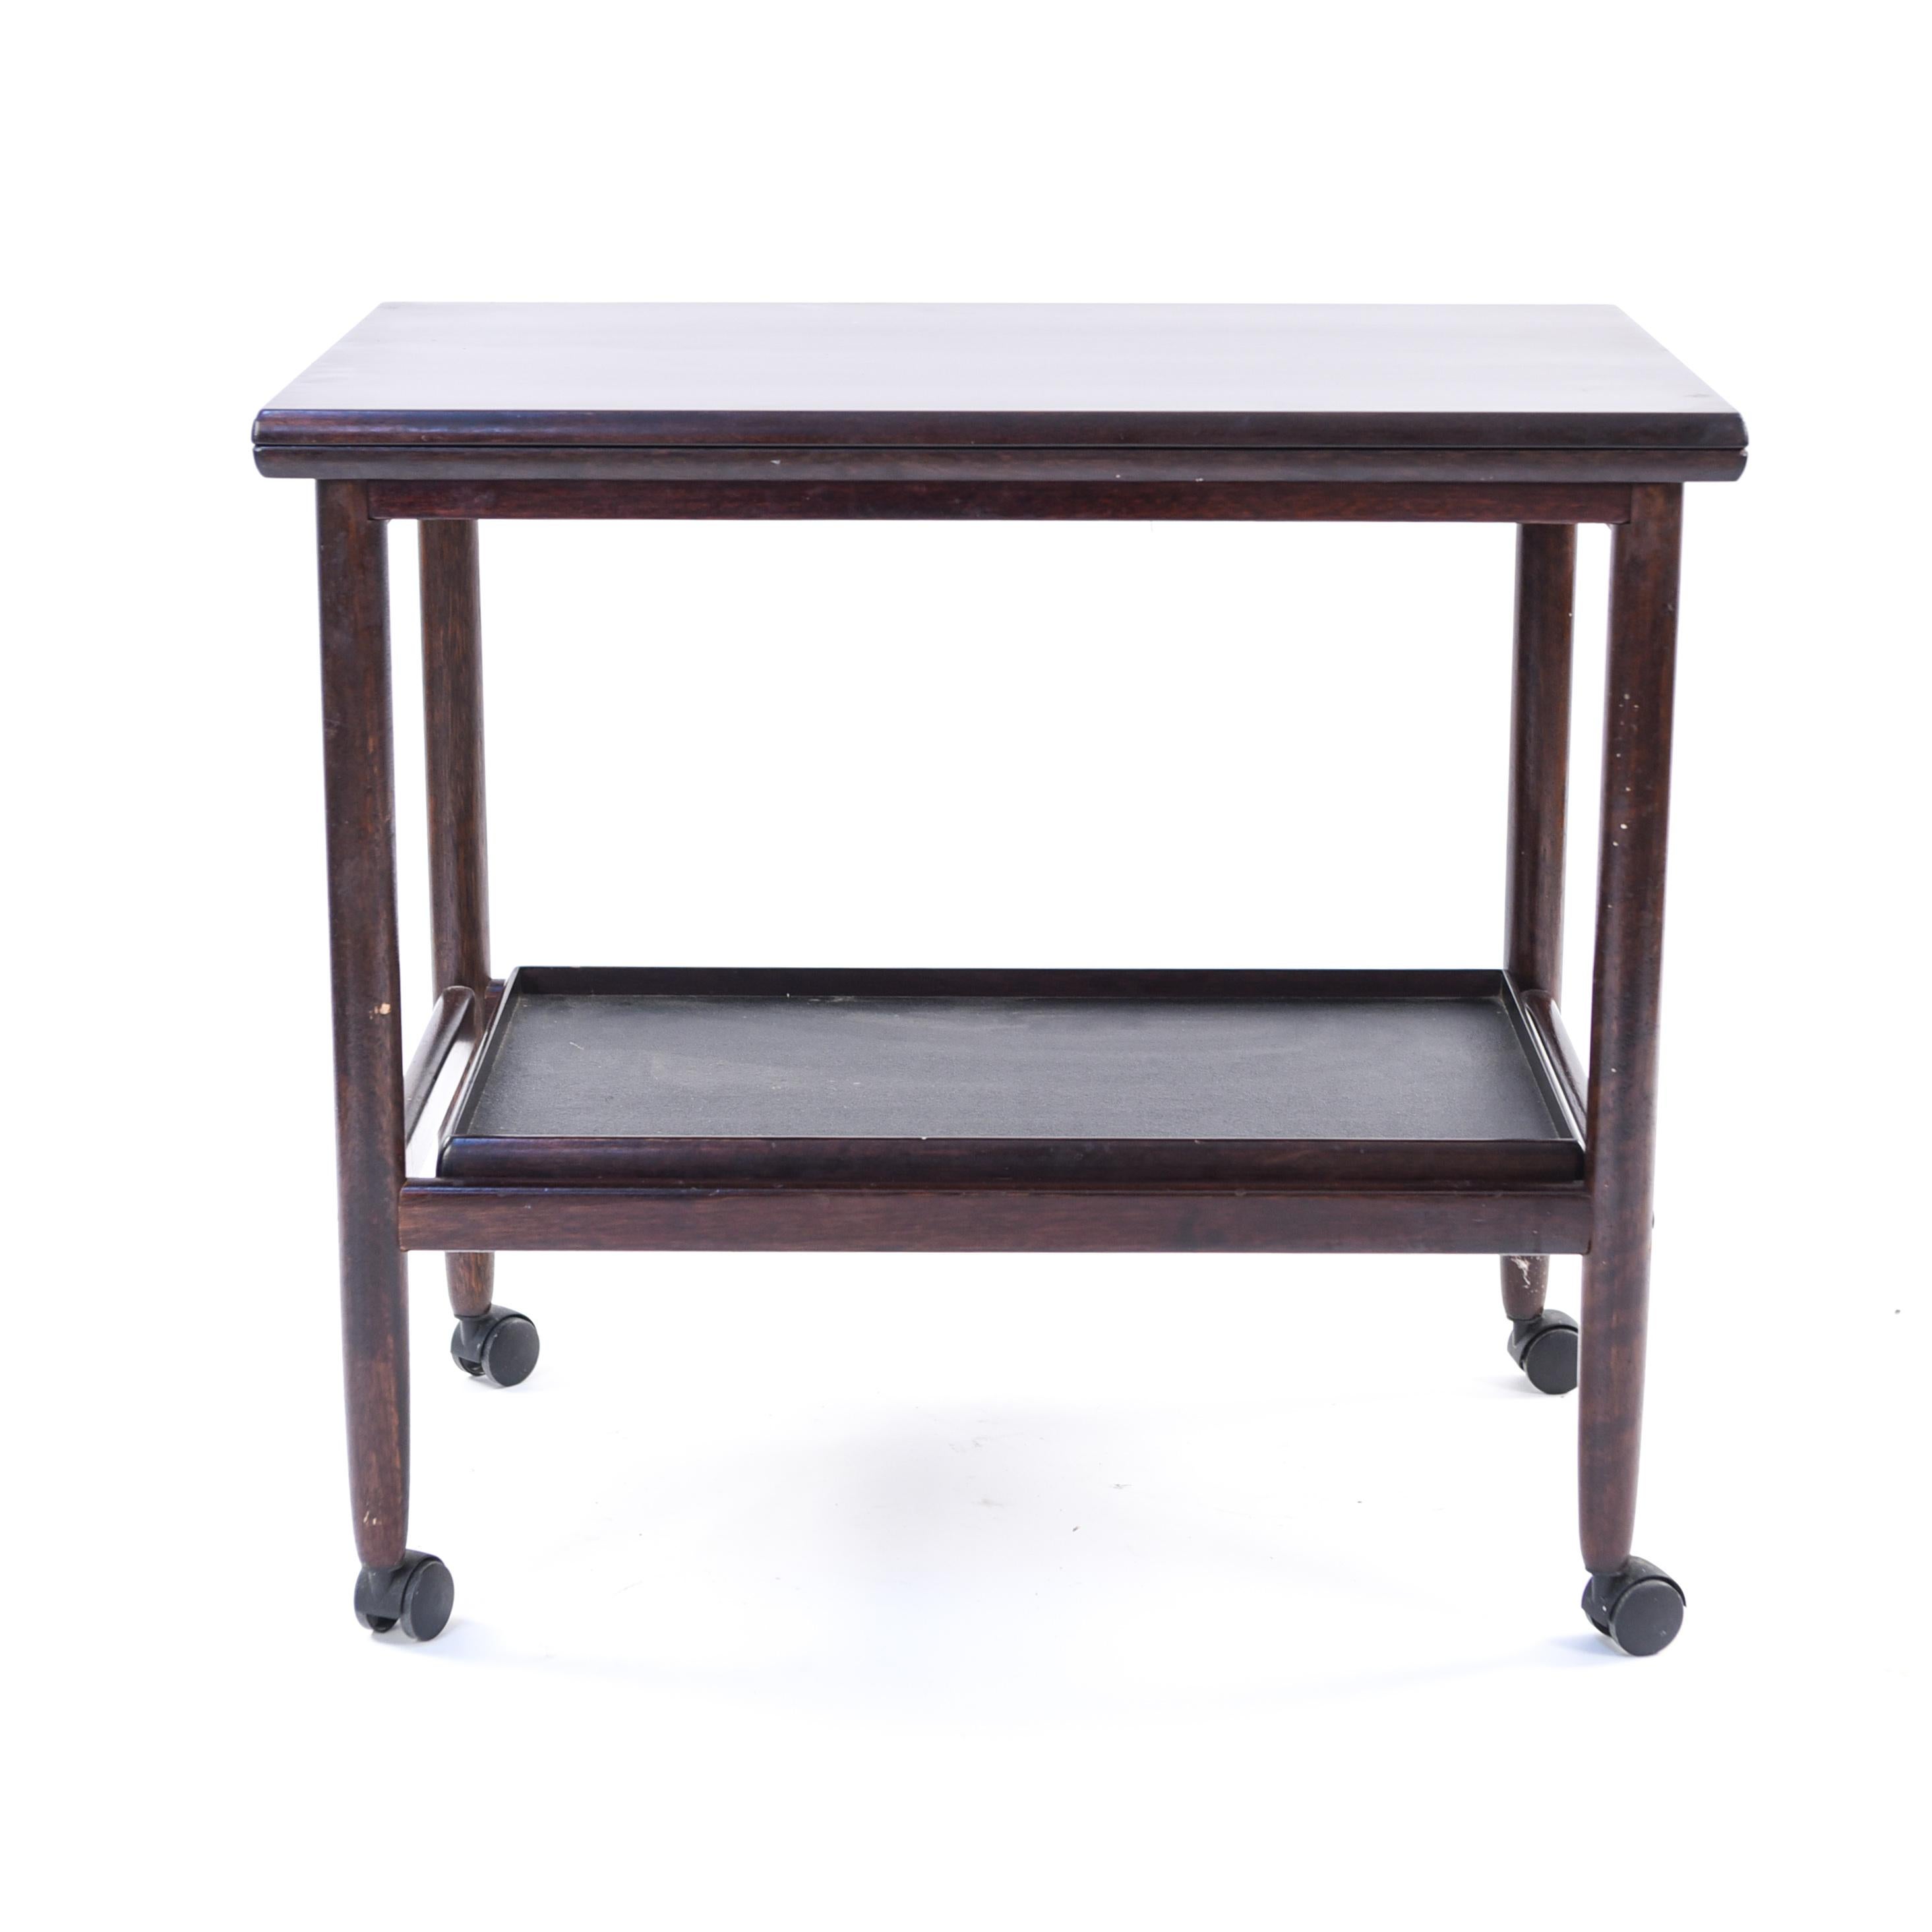 This mahogany serving cart was designed by Ole Wanscher for Poul Jeppesen's dining set 